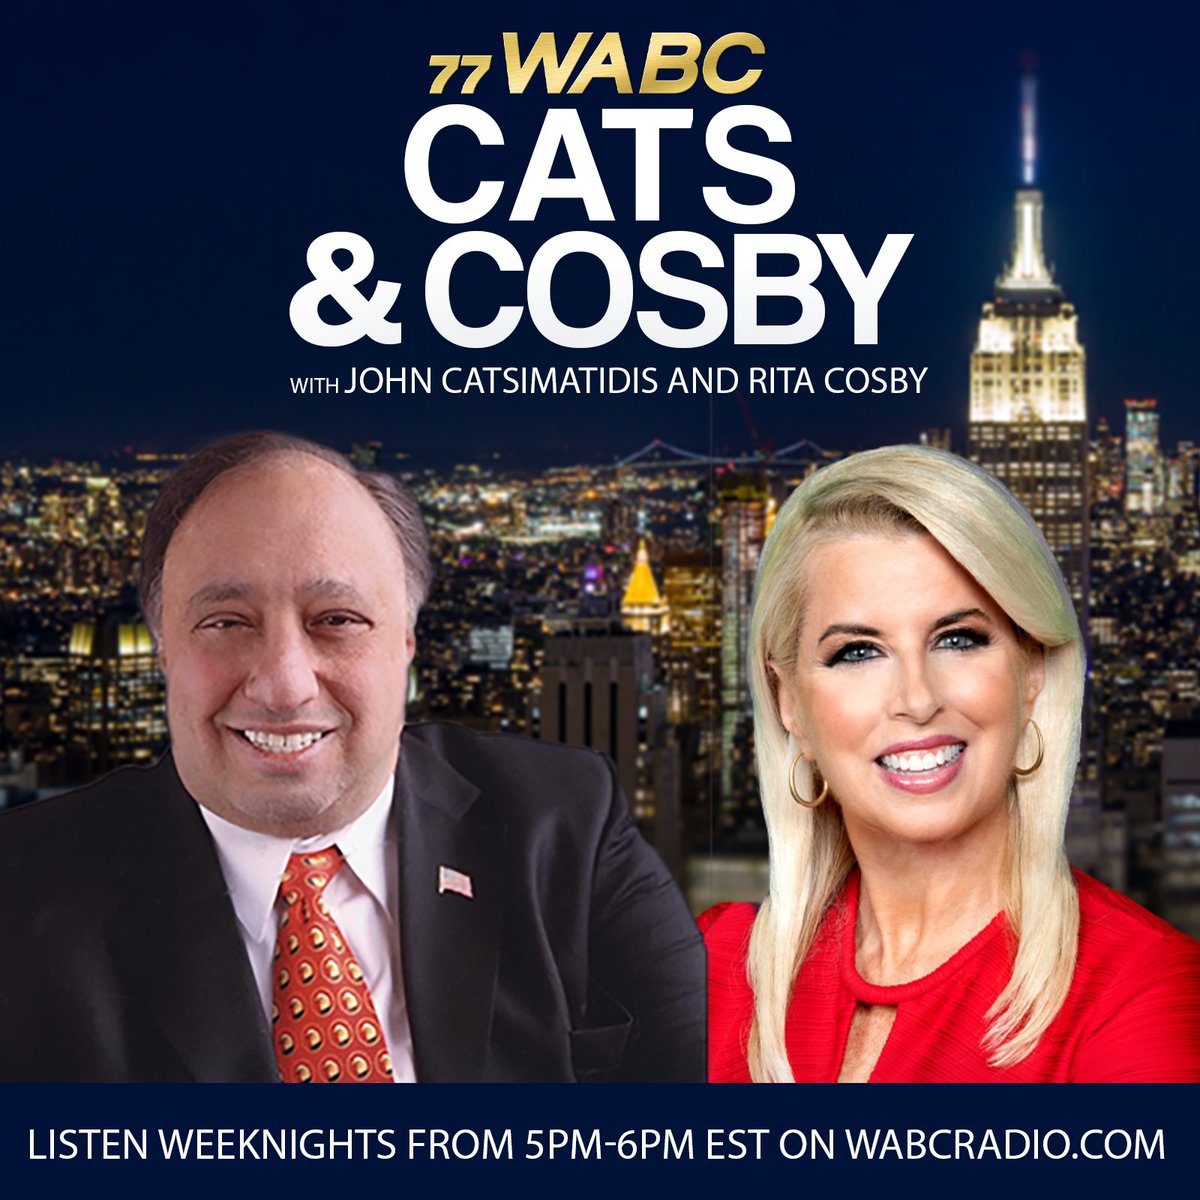 At 5PM on @Catsandcosby with @JCats2013 & @RitaCosby: John Catsimatidis & Rita Cosby mix common sense thinking while exploring the truth & telling both sides of the story. Special guests and an informative conversation! Listen on wabcradio.com or on the 77 WABC app!